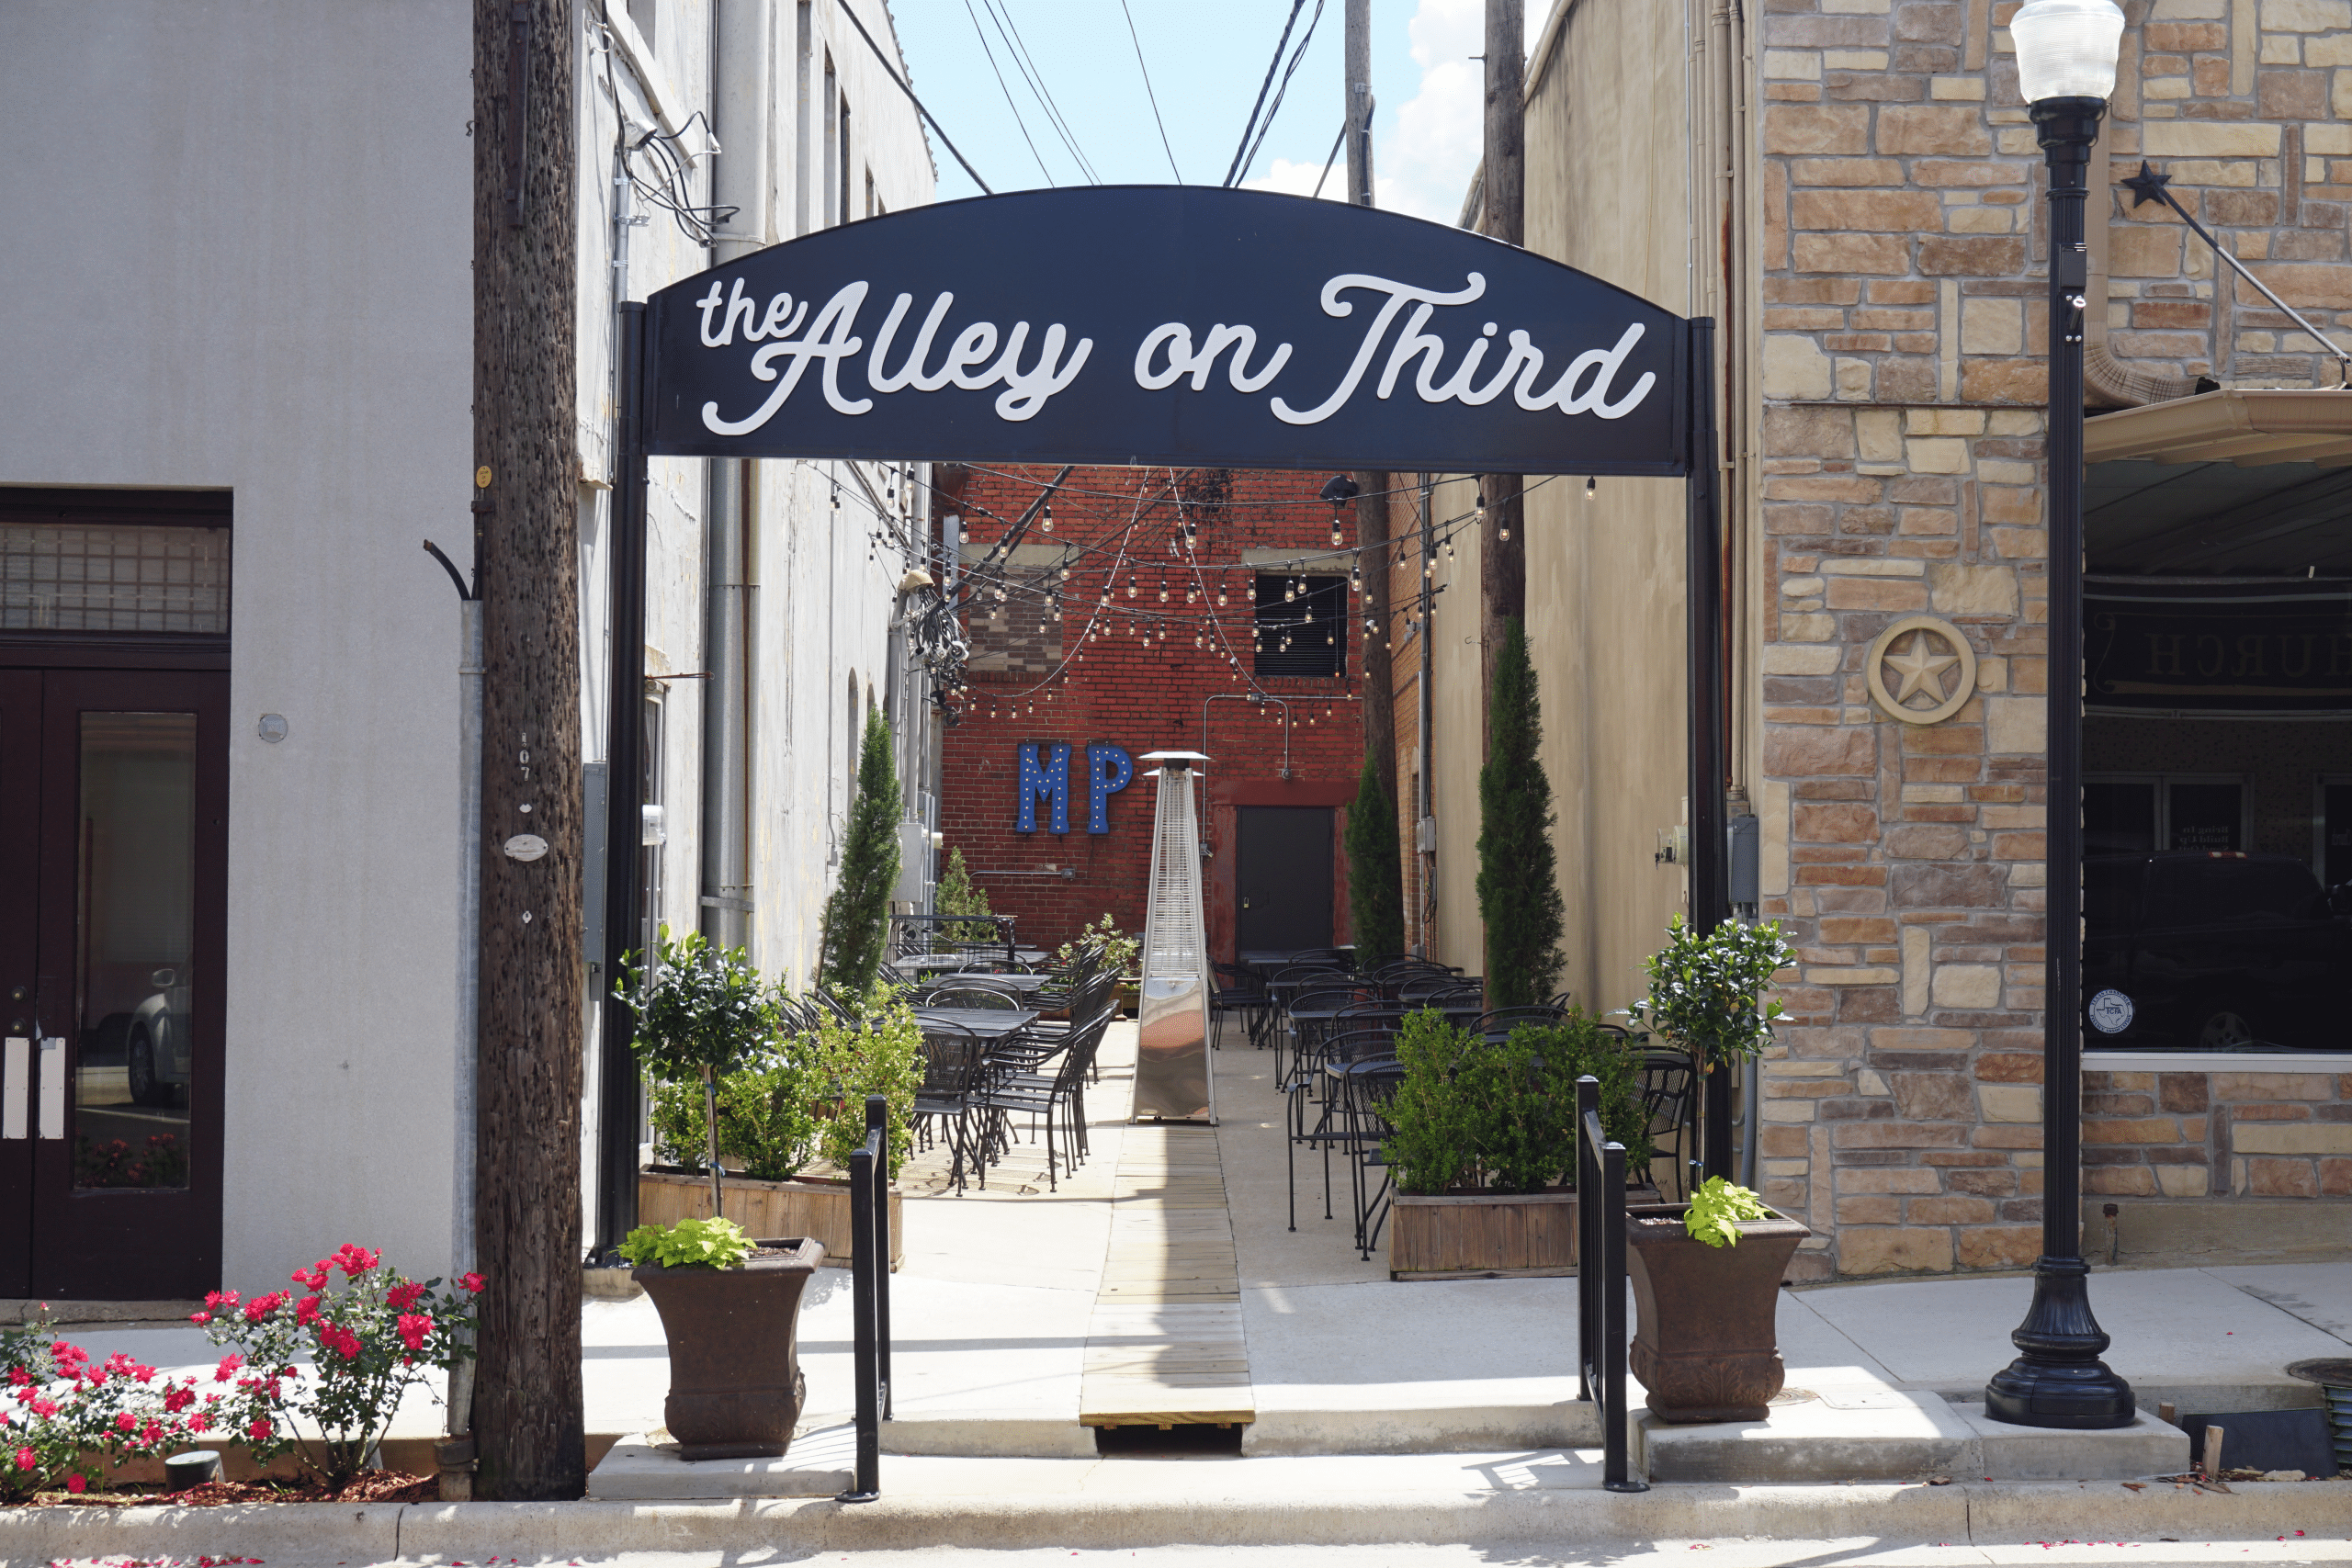 The Alley on Third